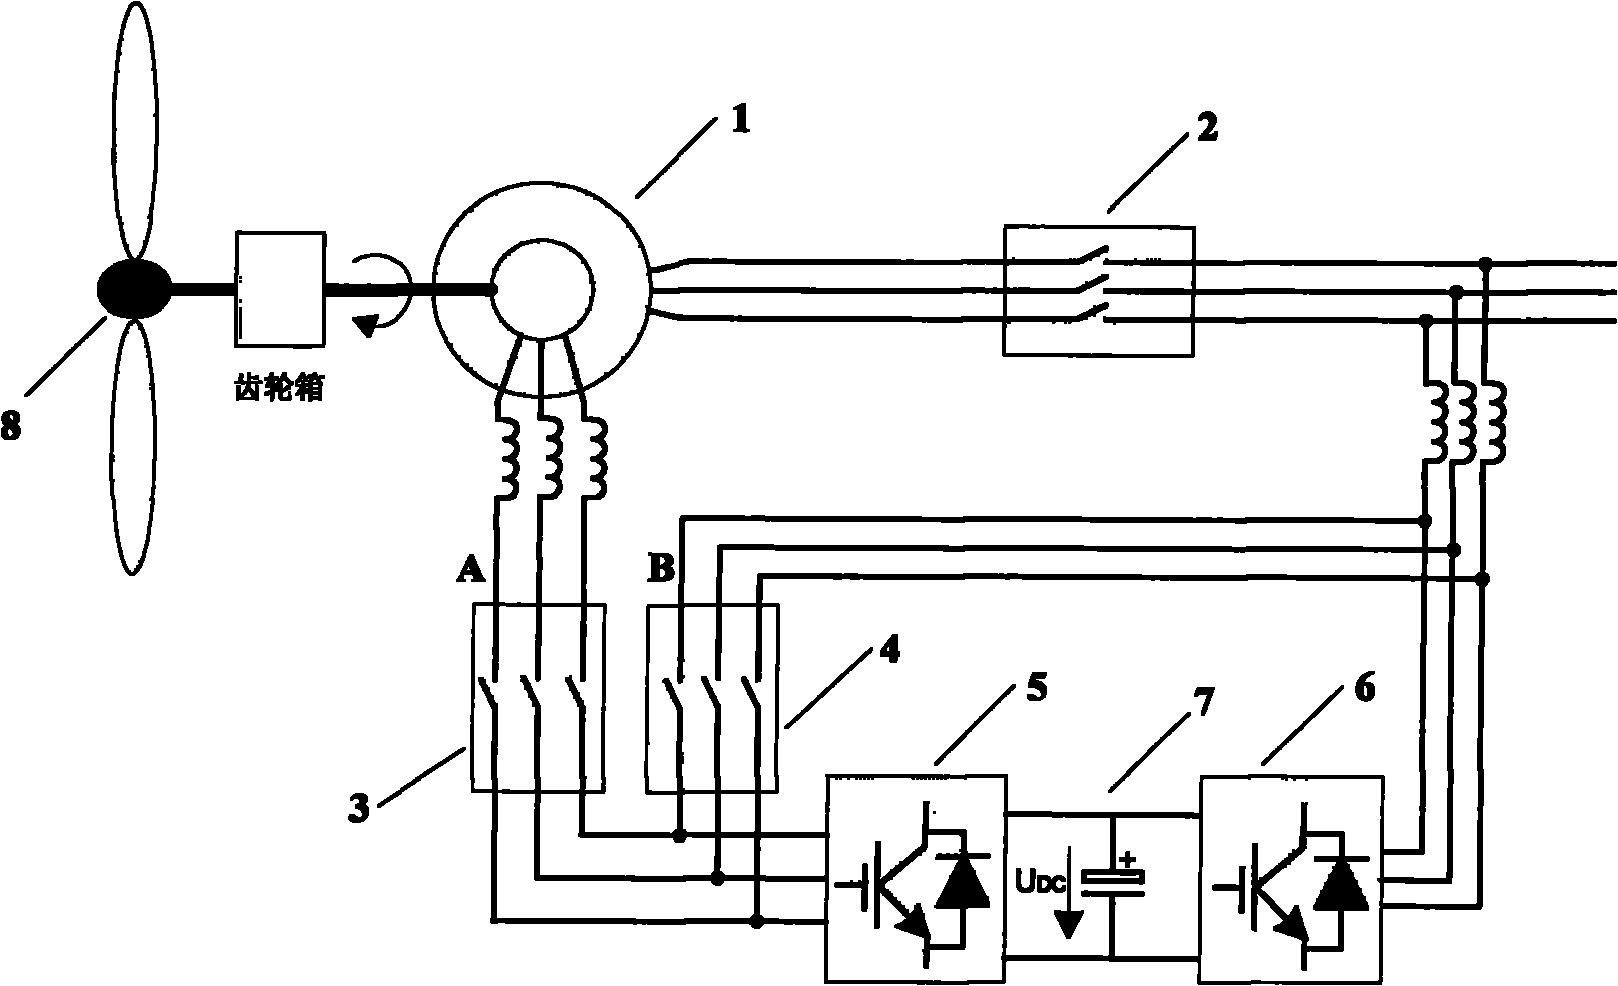 Low voltage ride through control circuit of doubly-fed variable-speed constant-frequency wind power generator unit